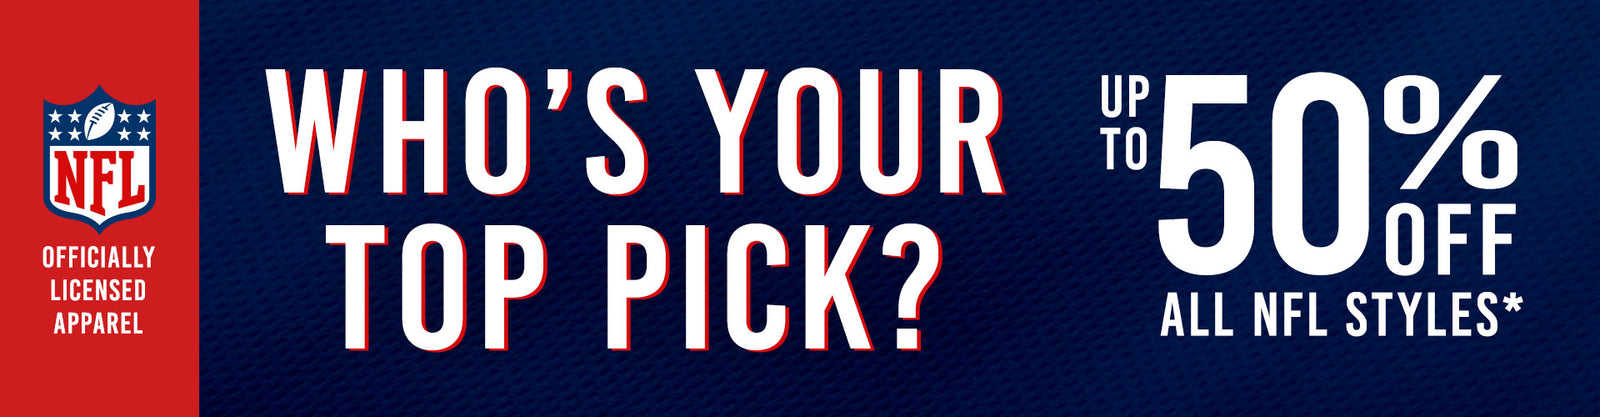 Promotional banner for nfl officially licensed apparel featuring "who's your top pick?" text and a "up to 50% off all nfl styles" offer.